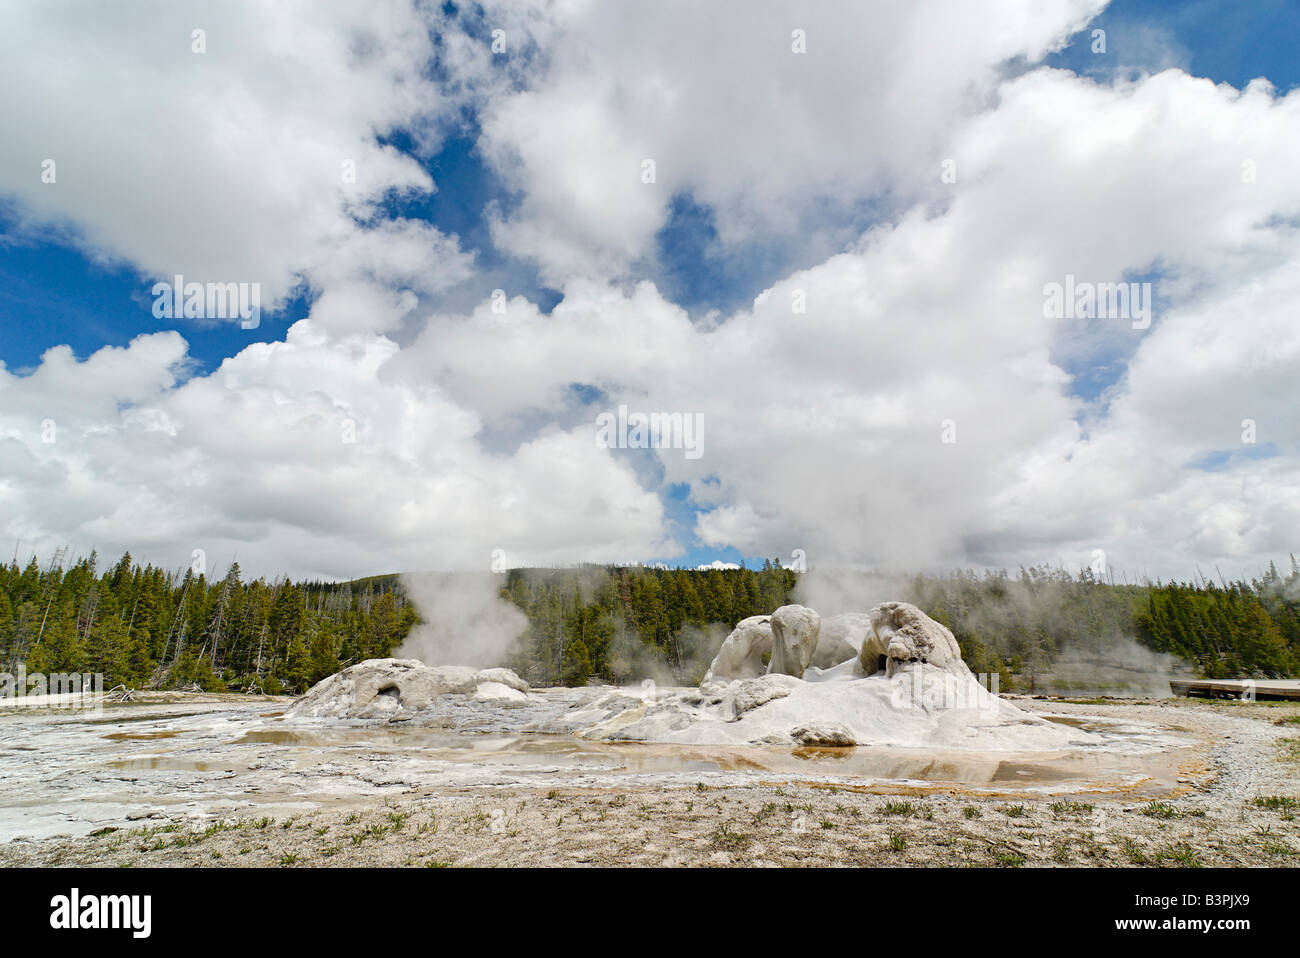 Twin geysers steaming under a cloudy blue sky in Yellowstone National Park Stock Photo